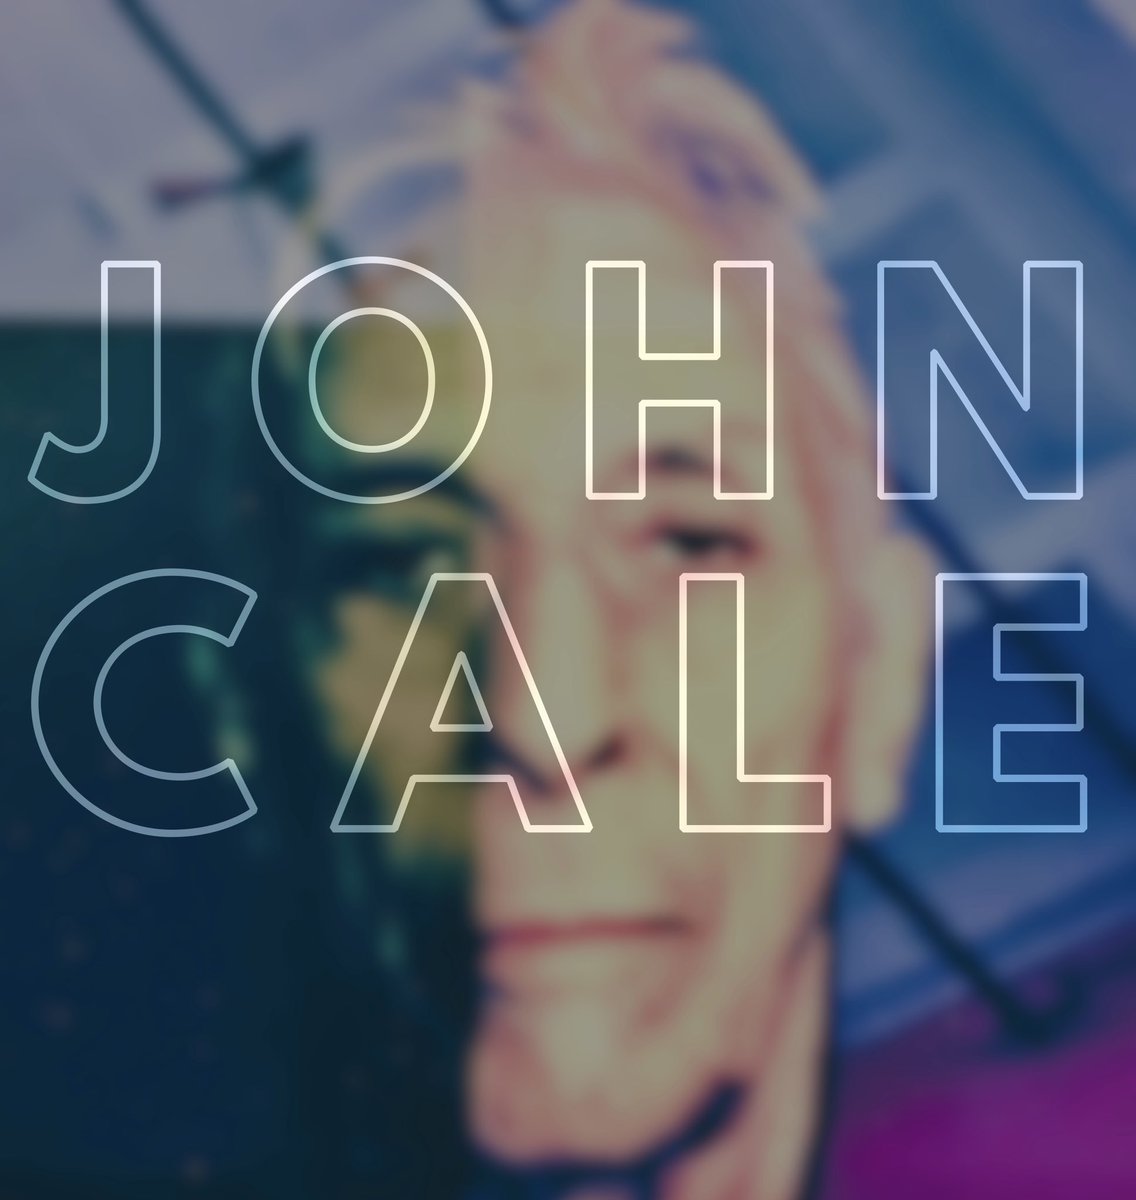 This aggressive and joyful new track from John Cale is just what I needed today - that’s why it’s this week’s A Song For Friday! open.substack.com/pub/anearful/p… #NewMusicFriday @Dominorecordco